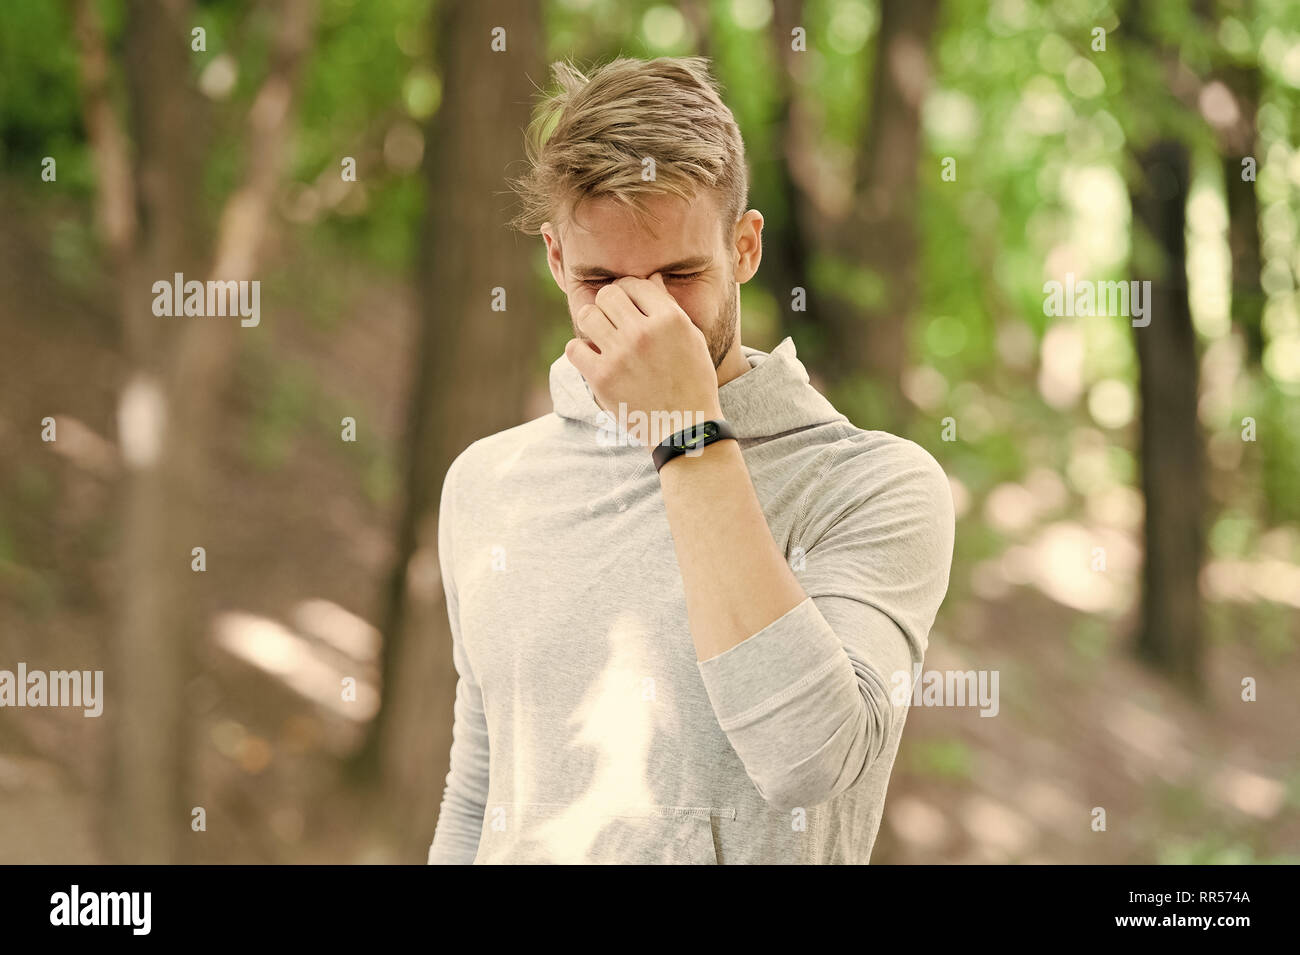 Pain after workout. Man jogger stop running in park because of headache or  nose bleeding. Runner with pedometer band finished training because of  pain. Man runner workout outdoor feel pain Stock Photo -